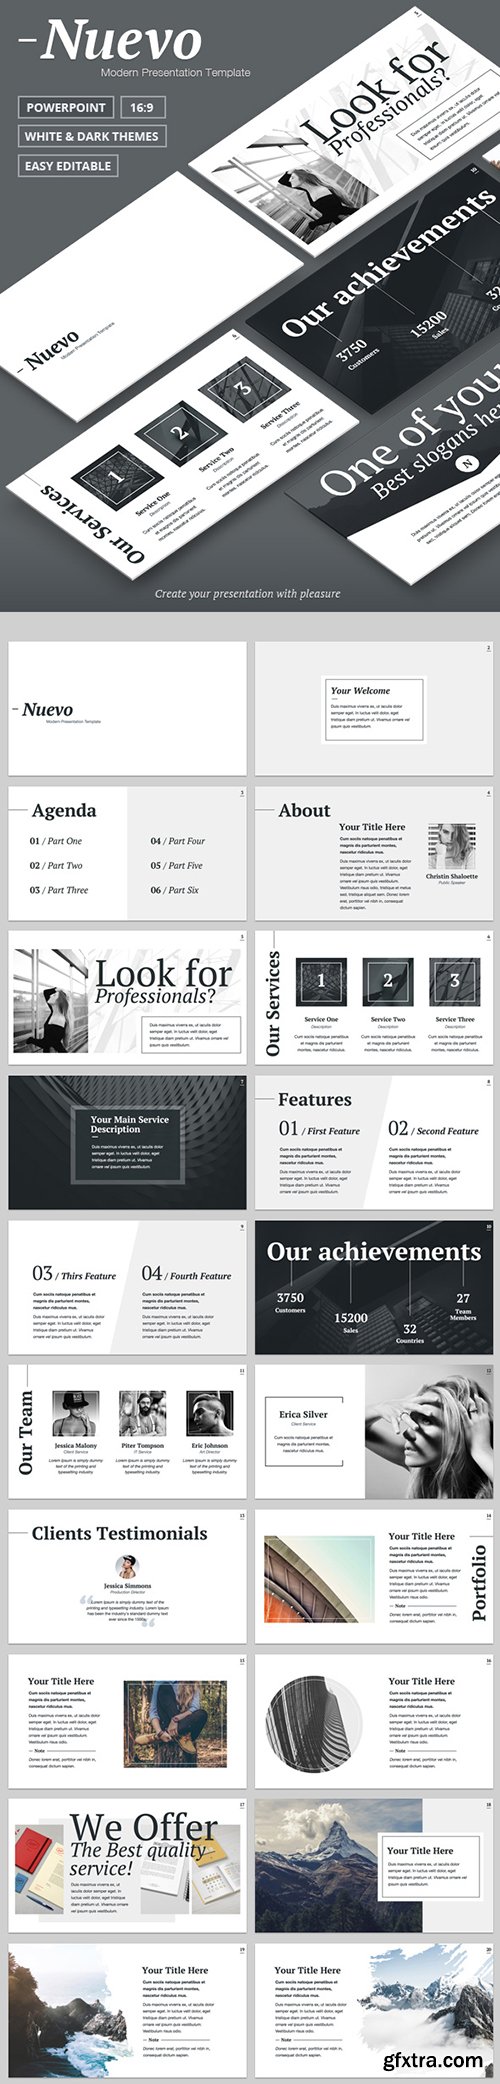 Graphicriver - Nuevo - Modern & Clean PowerPoint Template 17550538